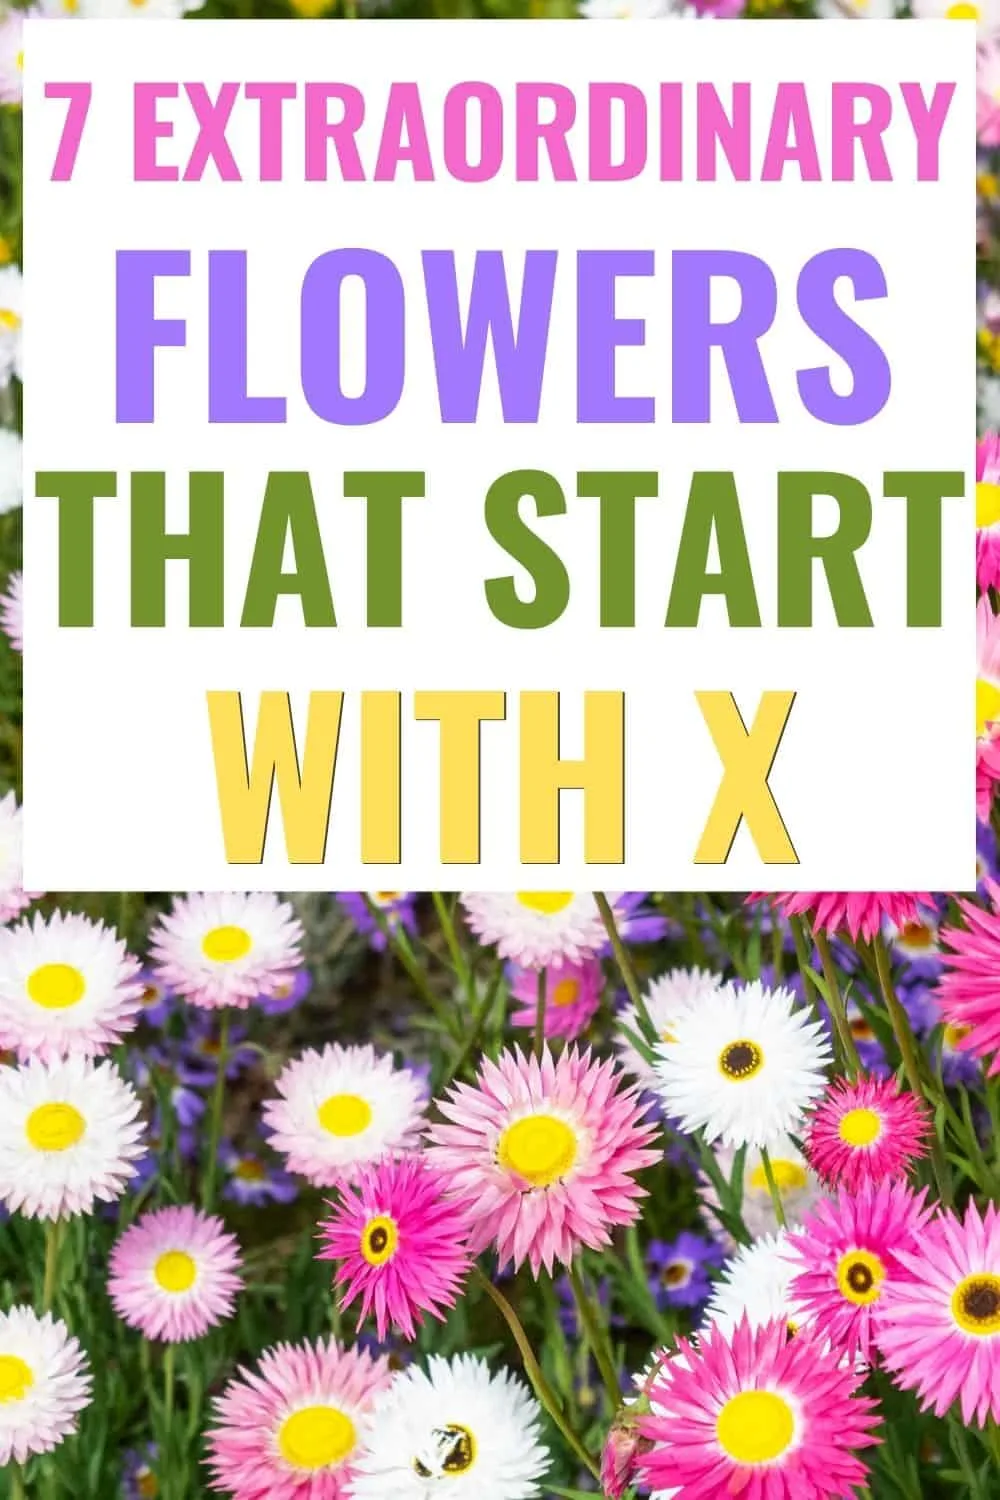 7 extraordinary flowers that start with x